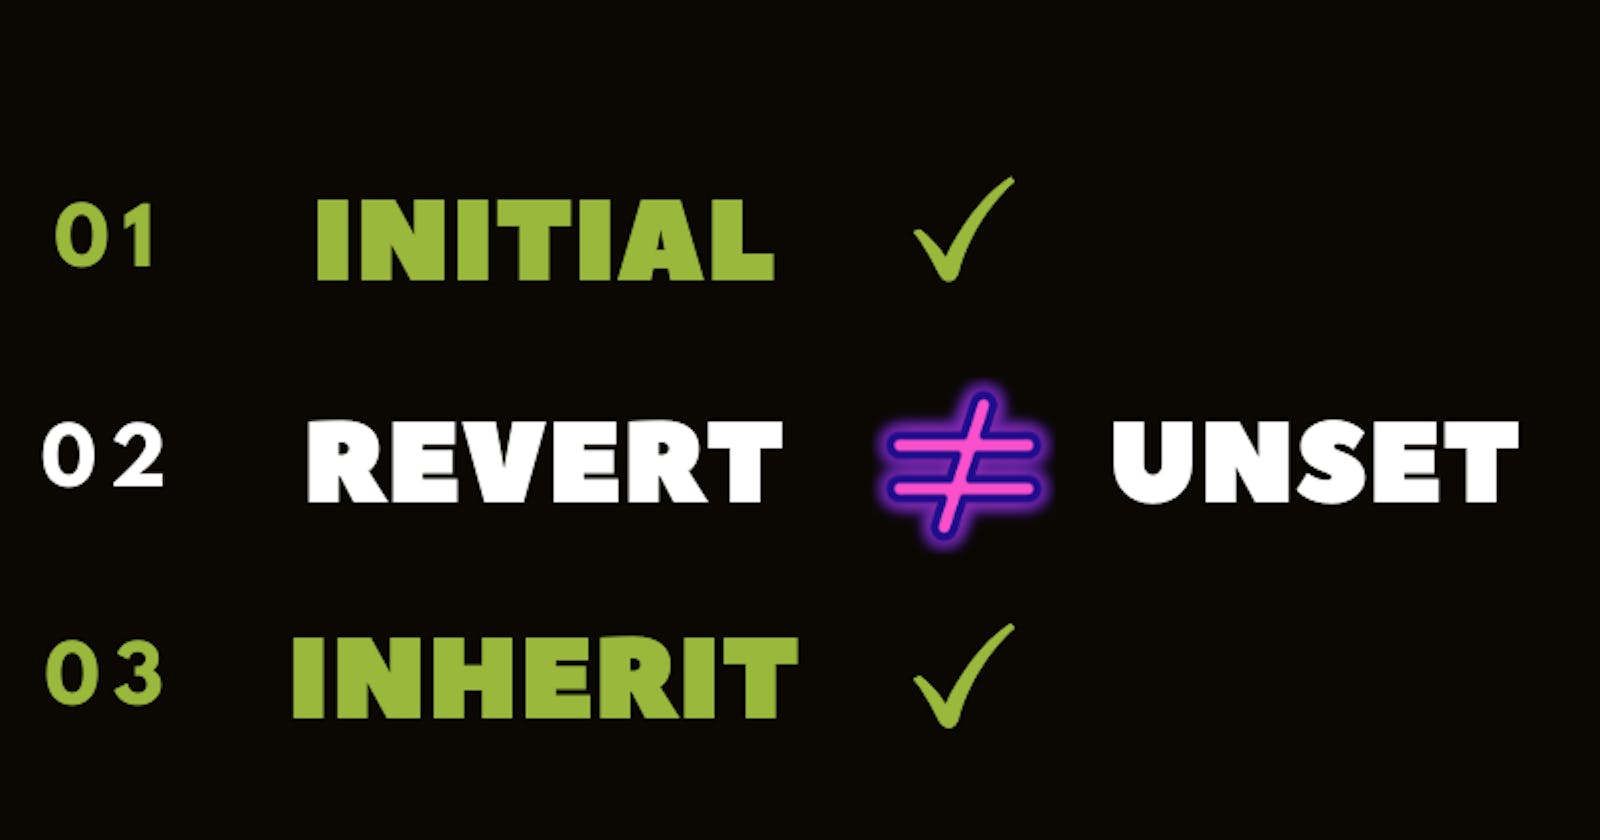 Do you really know how exactly inheritance works in CSS ?